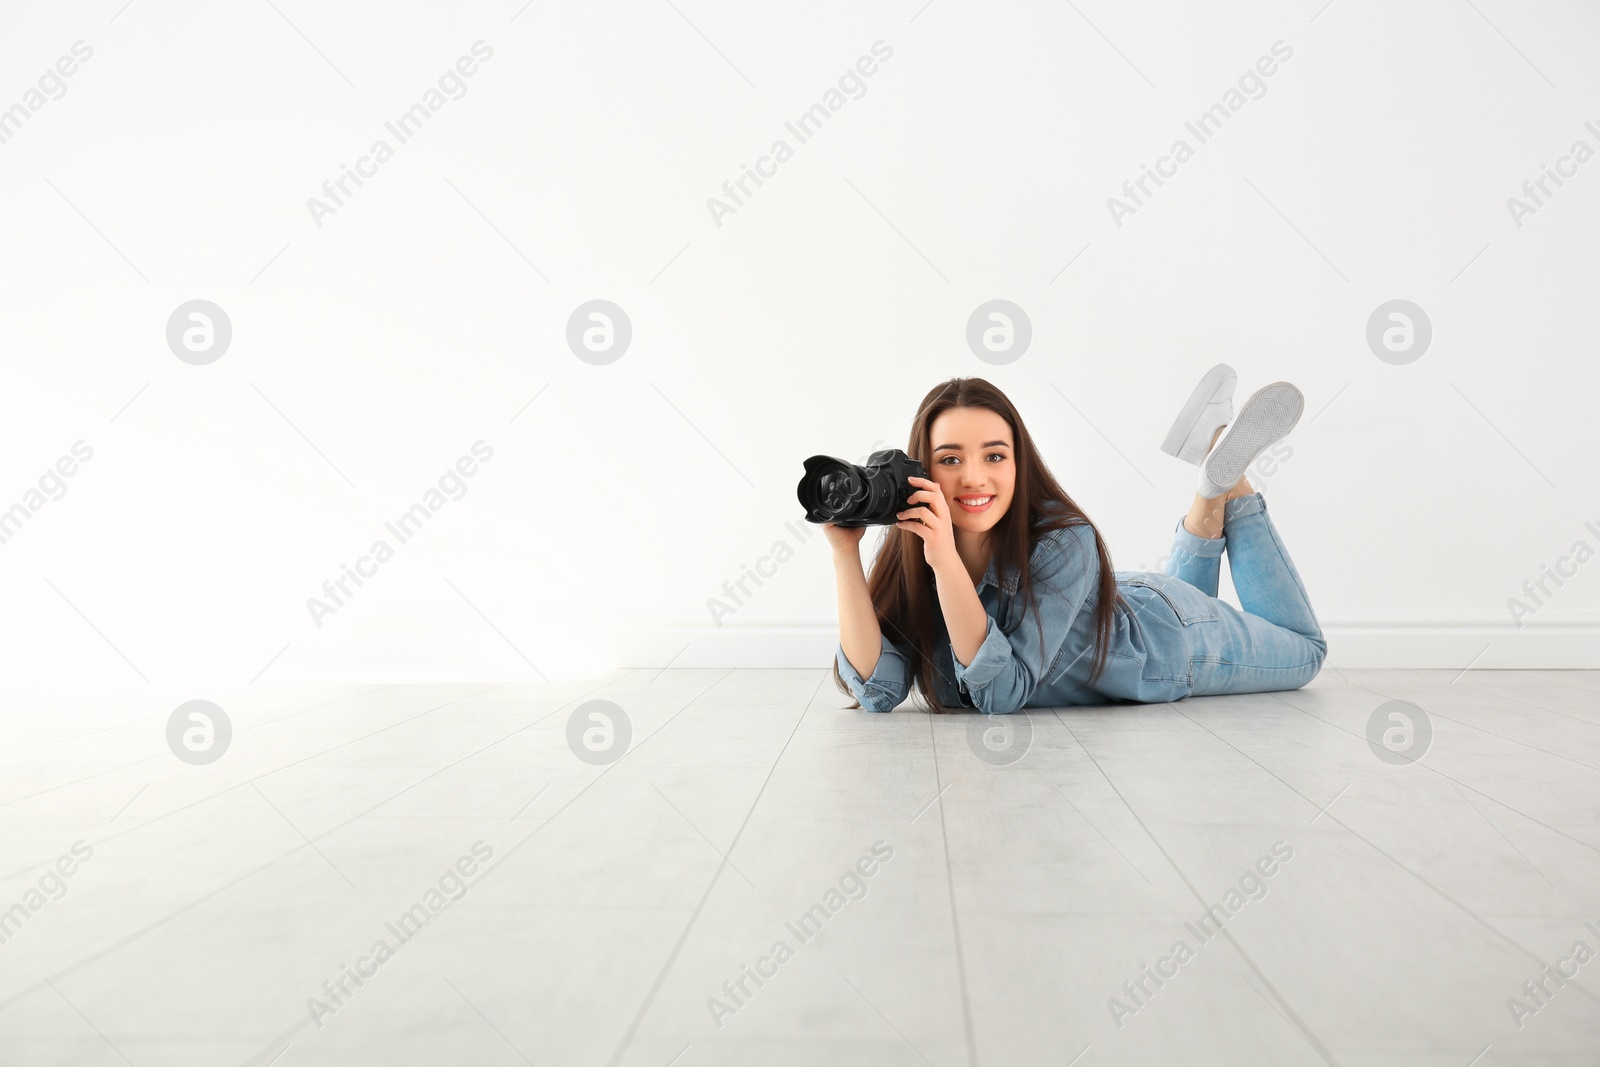 Photo of Female photographer with camera lying on floor indoors